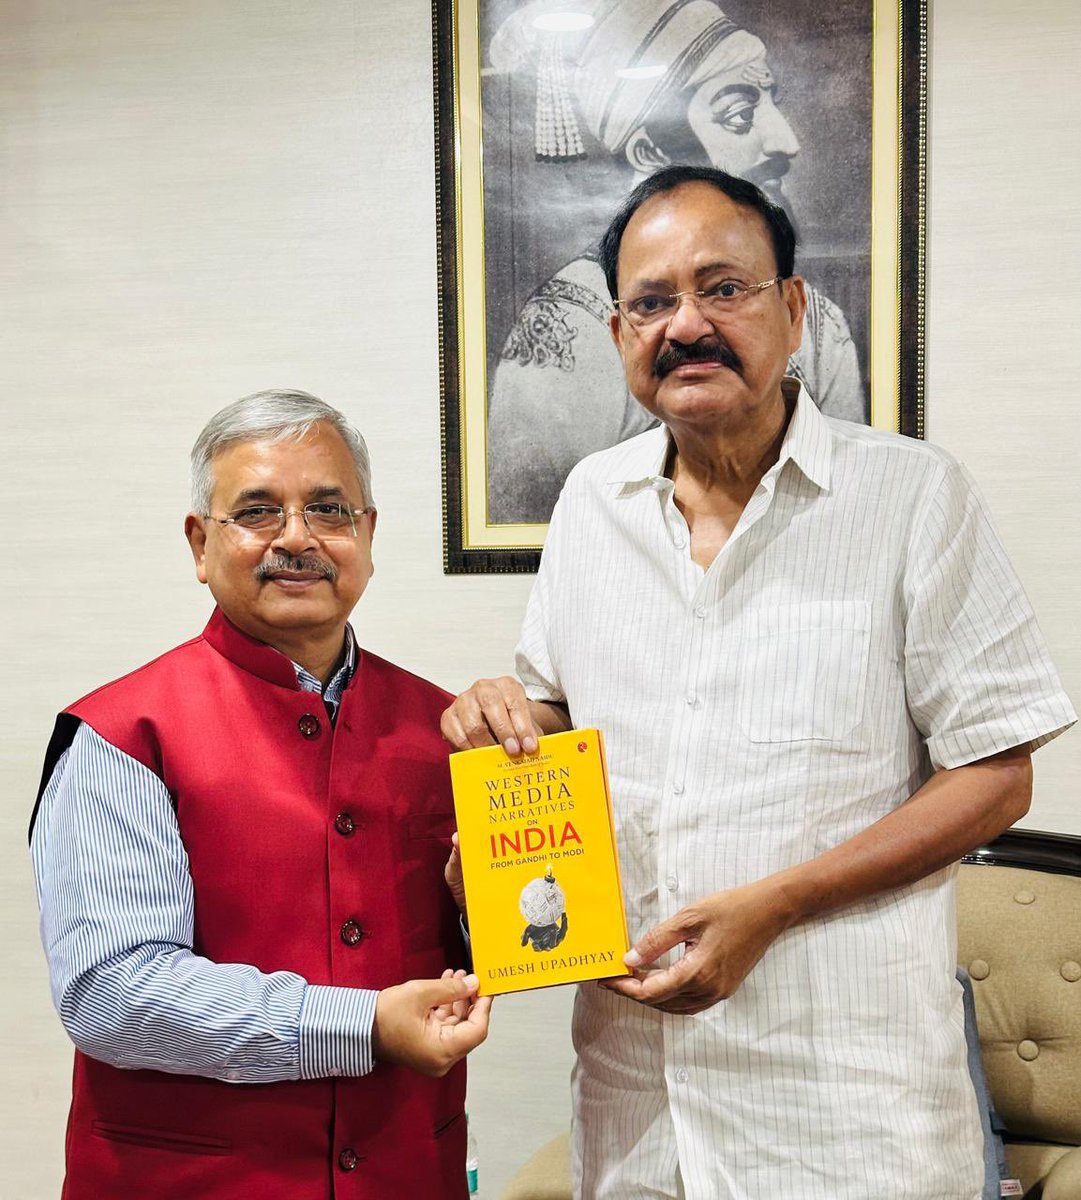 Happy to receive a copy of the Book Western Media Narratives on India-Gandhi to Modi from the author Umesh Upadhyay. The book draws from media studies, history, sociology and political science based on sound research. It is an eye opener for those who want to understand anti